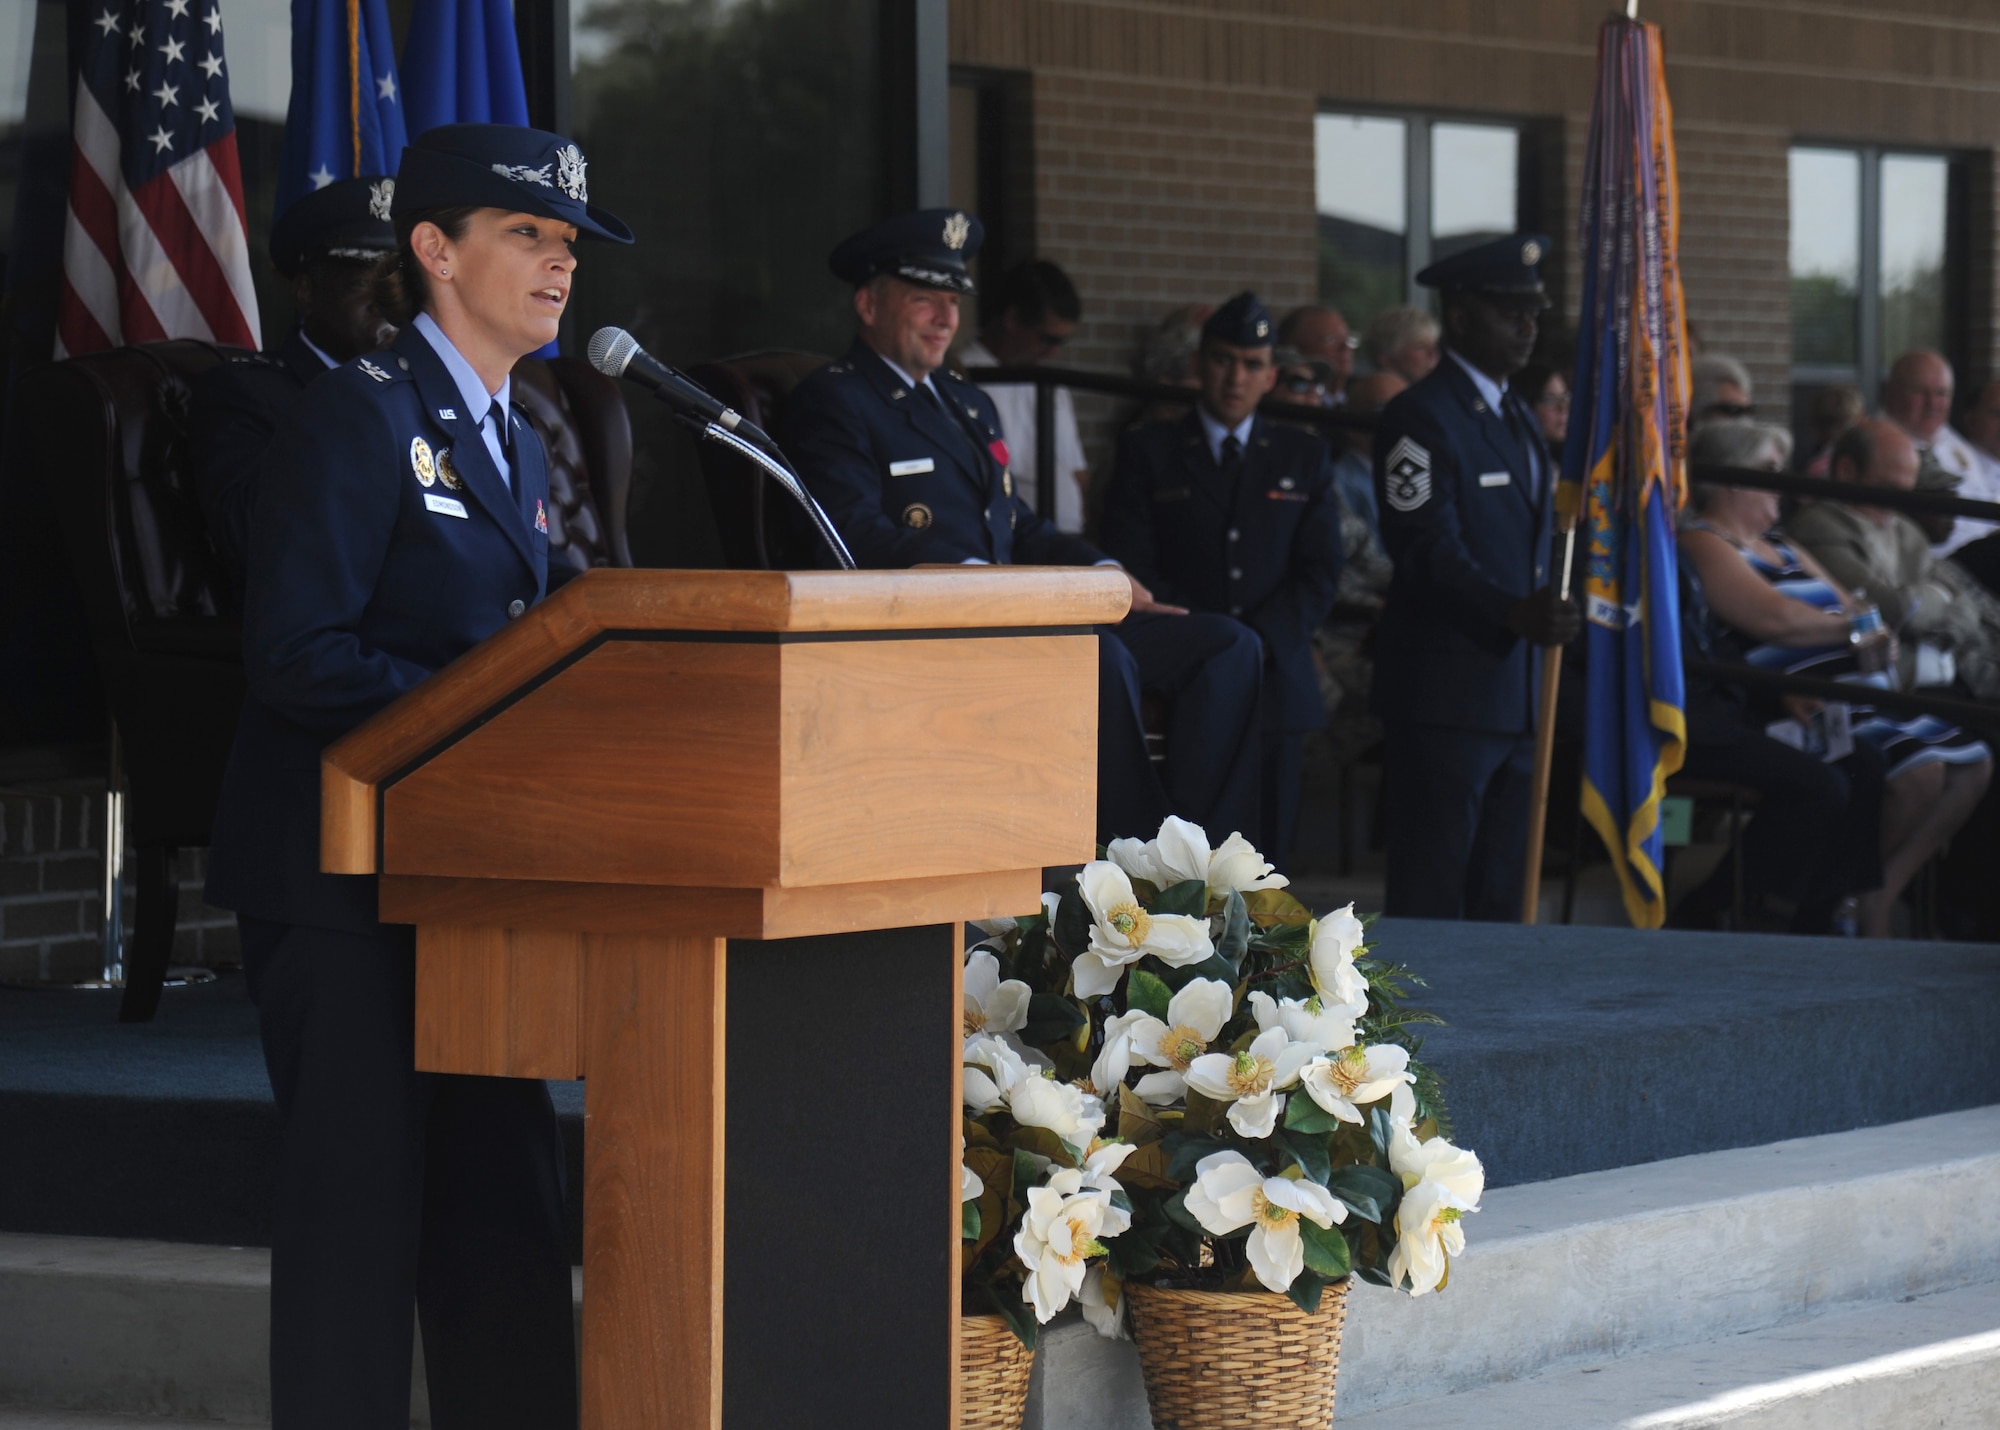 Col. Michele Edmondson, 81st Training Wing commander, gives her first speech as the 81st TRW commander during a change of command ceremony, June 26, 2015 at Keesler Air Force Base, Mississippi. Edmondson took command of the 81st TRW from Brig. Gen. Patrick Higby. (U.S. Air Force photo by Senior Airman Holly Mansfield)